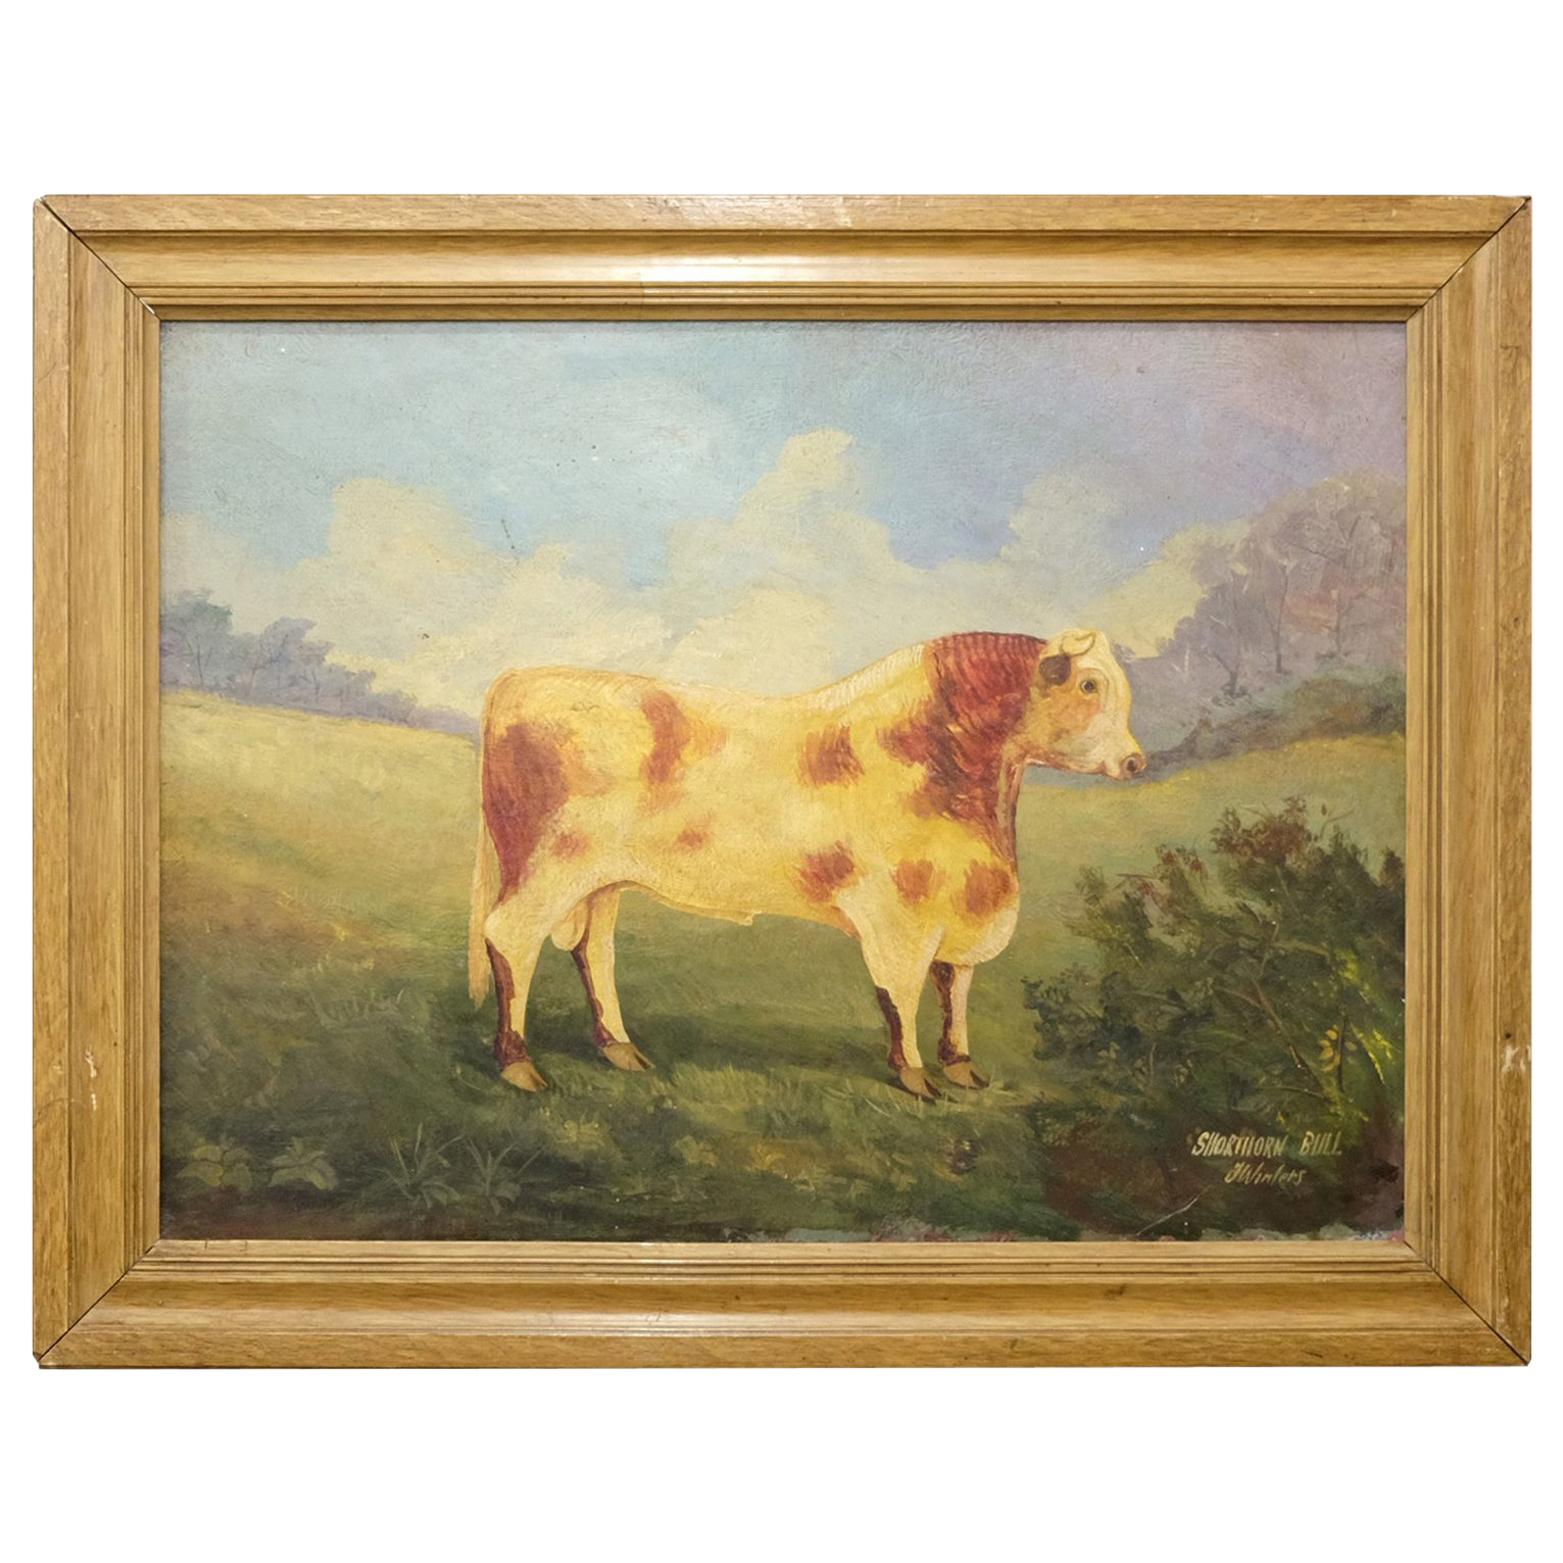 J. Winters, 20th Century Naive Signed Oil Painting of a Shorthorn Bull, Wall Art